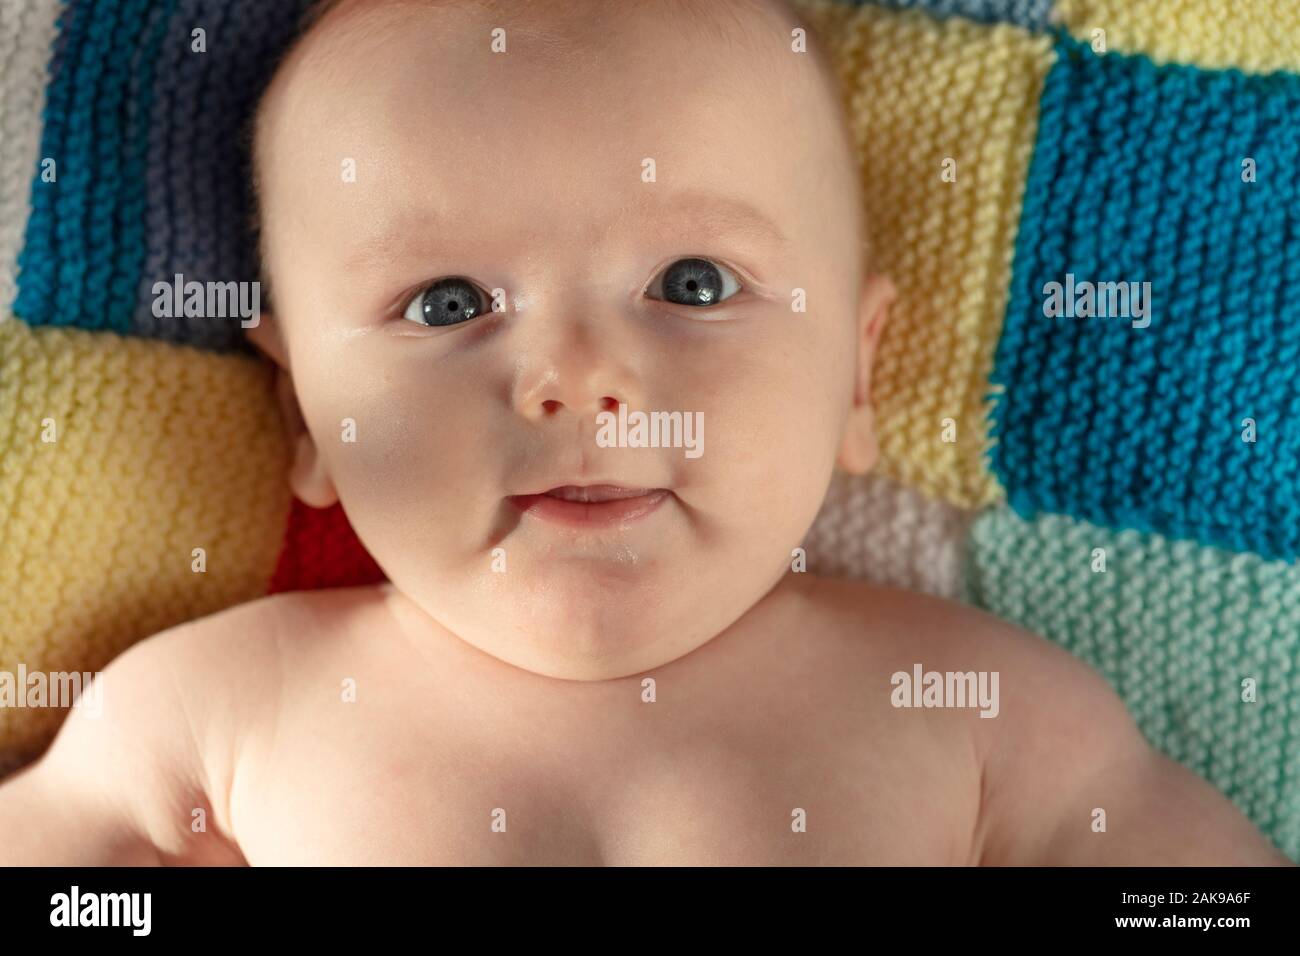 Portrait of a cute baby with blue eyes laying on a knitted balnket Stock Photo